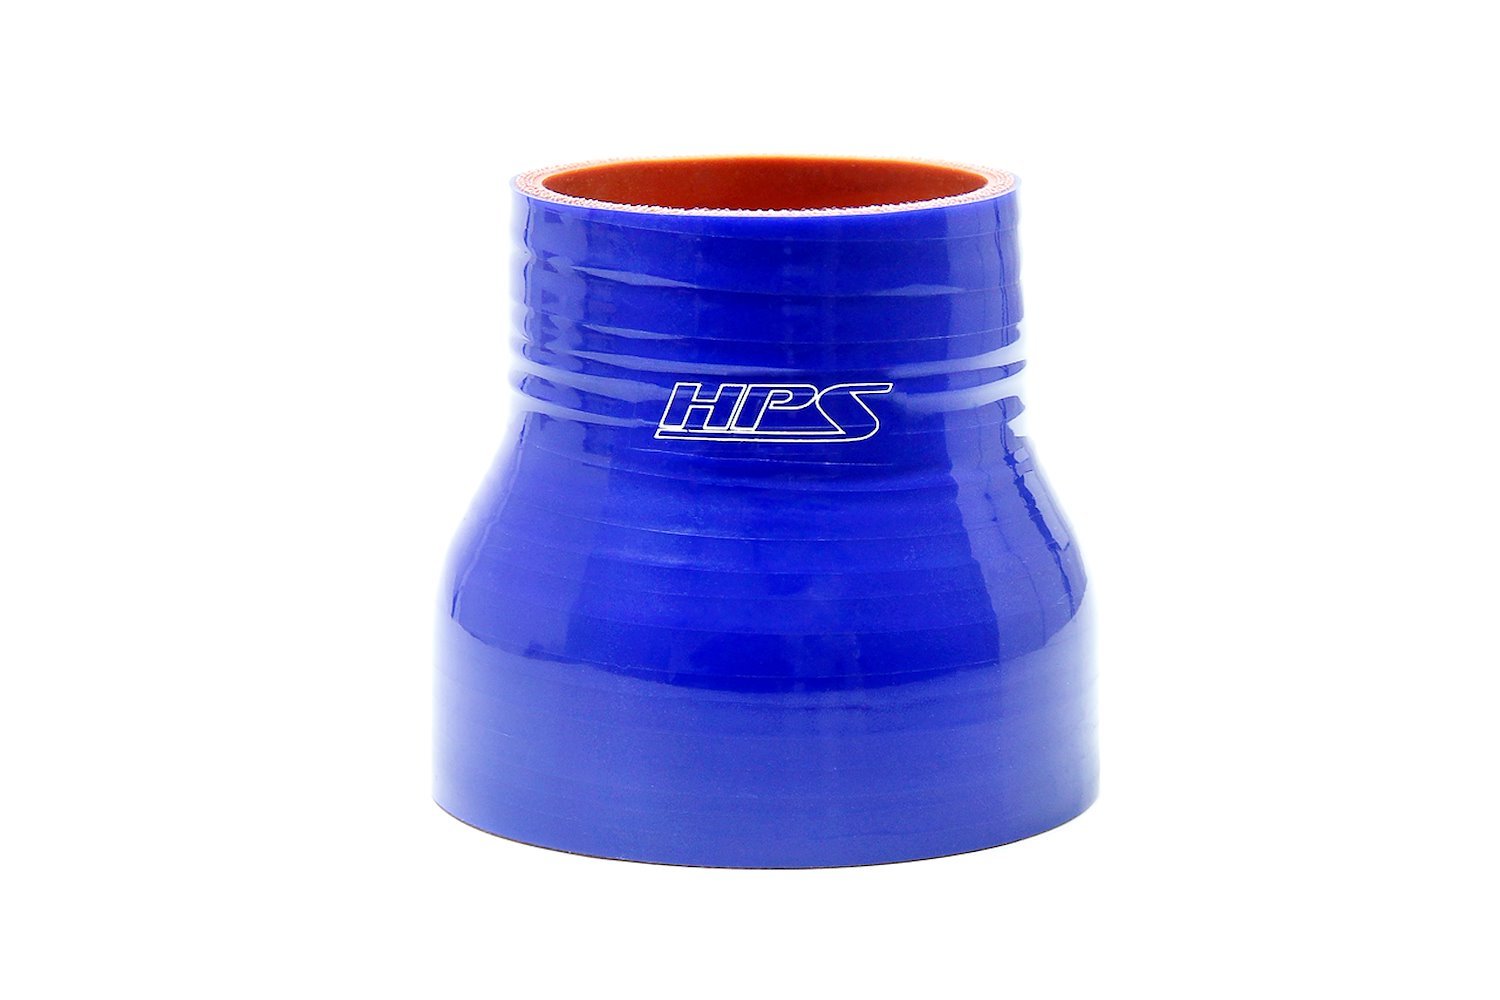 HTSR-175-200-BLUE Silicone Reducer Hose, High-Temp 4-Ply Reinforced, 1-3/4 in. - 2 in. ID, 3 in. Long, Blue